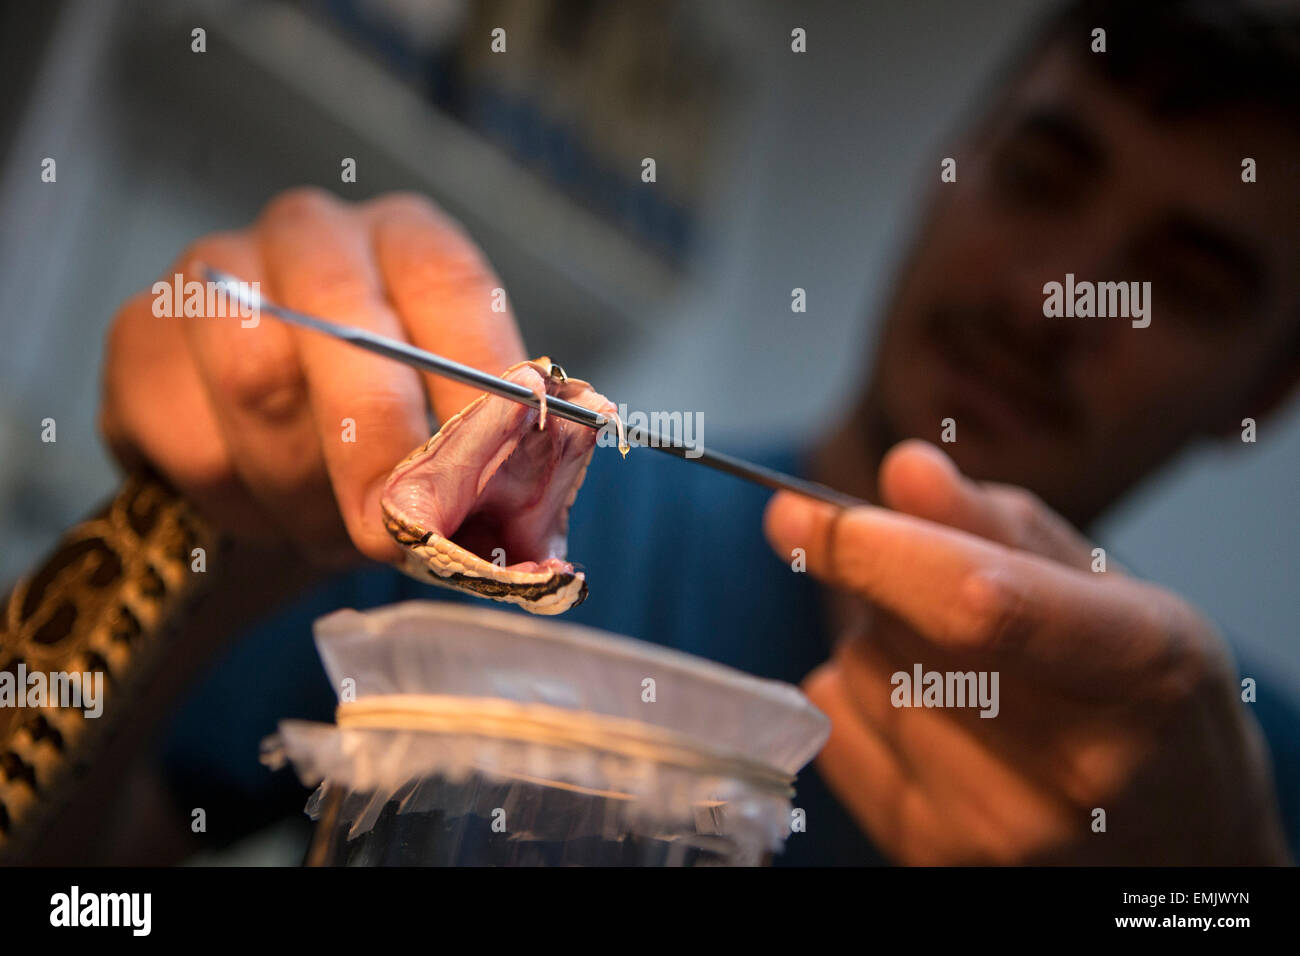 Buenos Aires, Argentina. 21st Apr, 2015. A biologist in the Poisonous Animals Area of the Antidotes Production Department of Malbran Institute, shows a drop of venom that comes from the fangs of a 'Yarara' snake in Buenos Aires, Argentina, on April 21, 2015. The Department is in charge of producing antidotes with the poison extracted from snakes, spiders and scorpions. © Martin Zabala/Xinhua/Alamy Live News Stock Photo